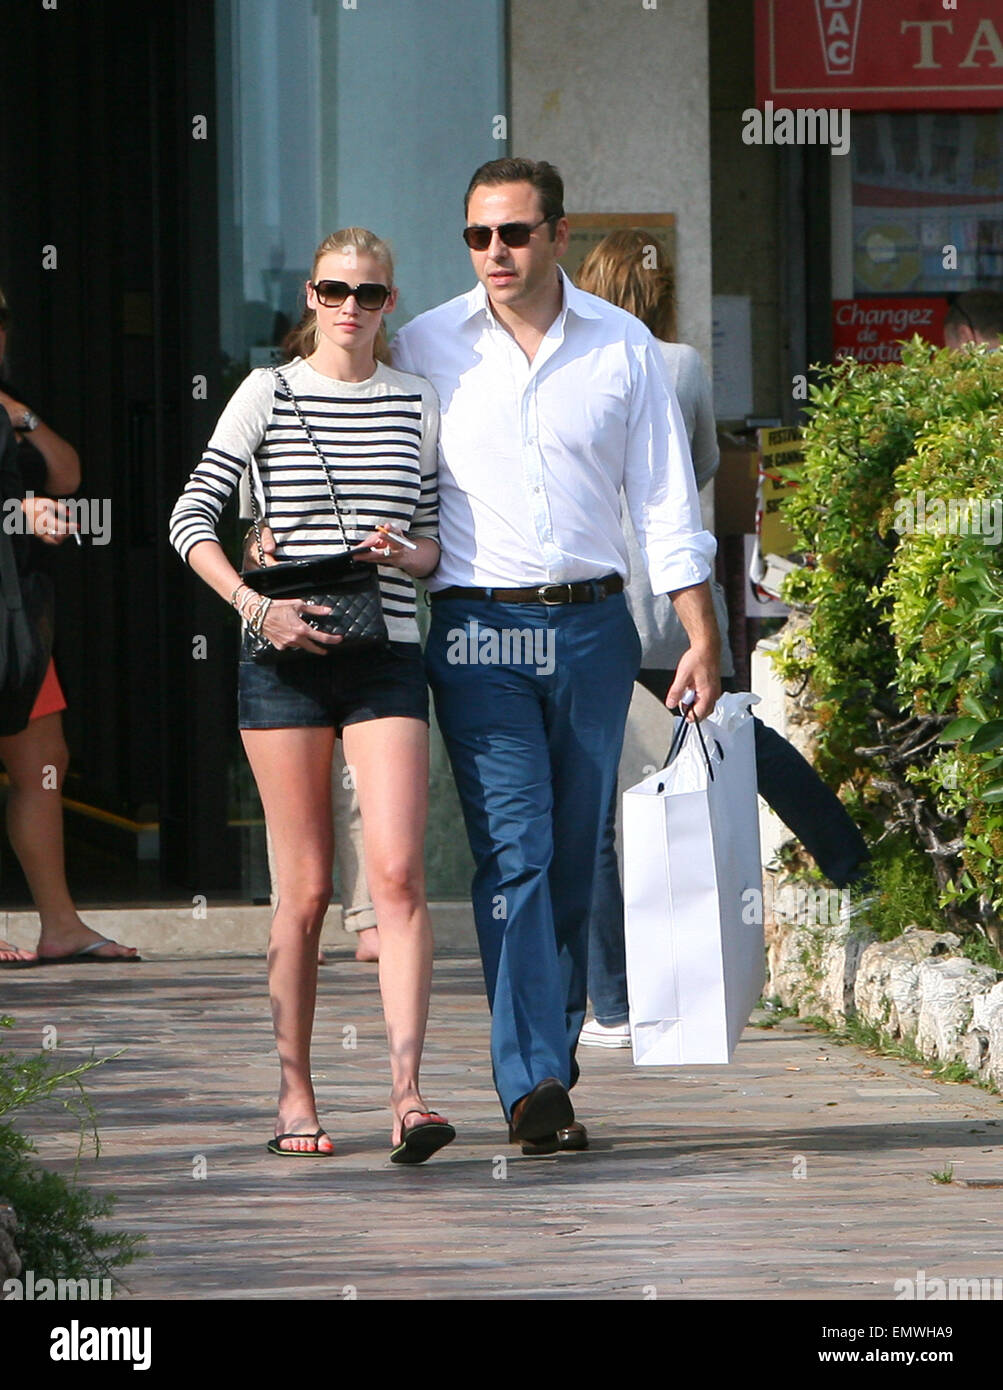 ¿Cuánto mide Lara Stone? - Altura - Real height 12may2011-cannes-david-walliams-with-his-wife-lara-stone-out-and-about-EMWHA9